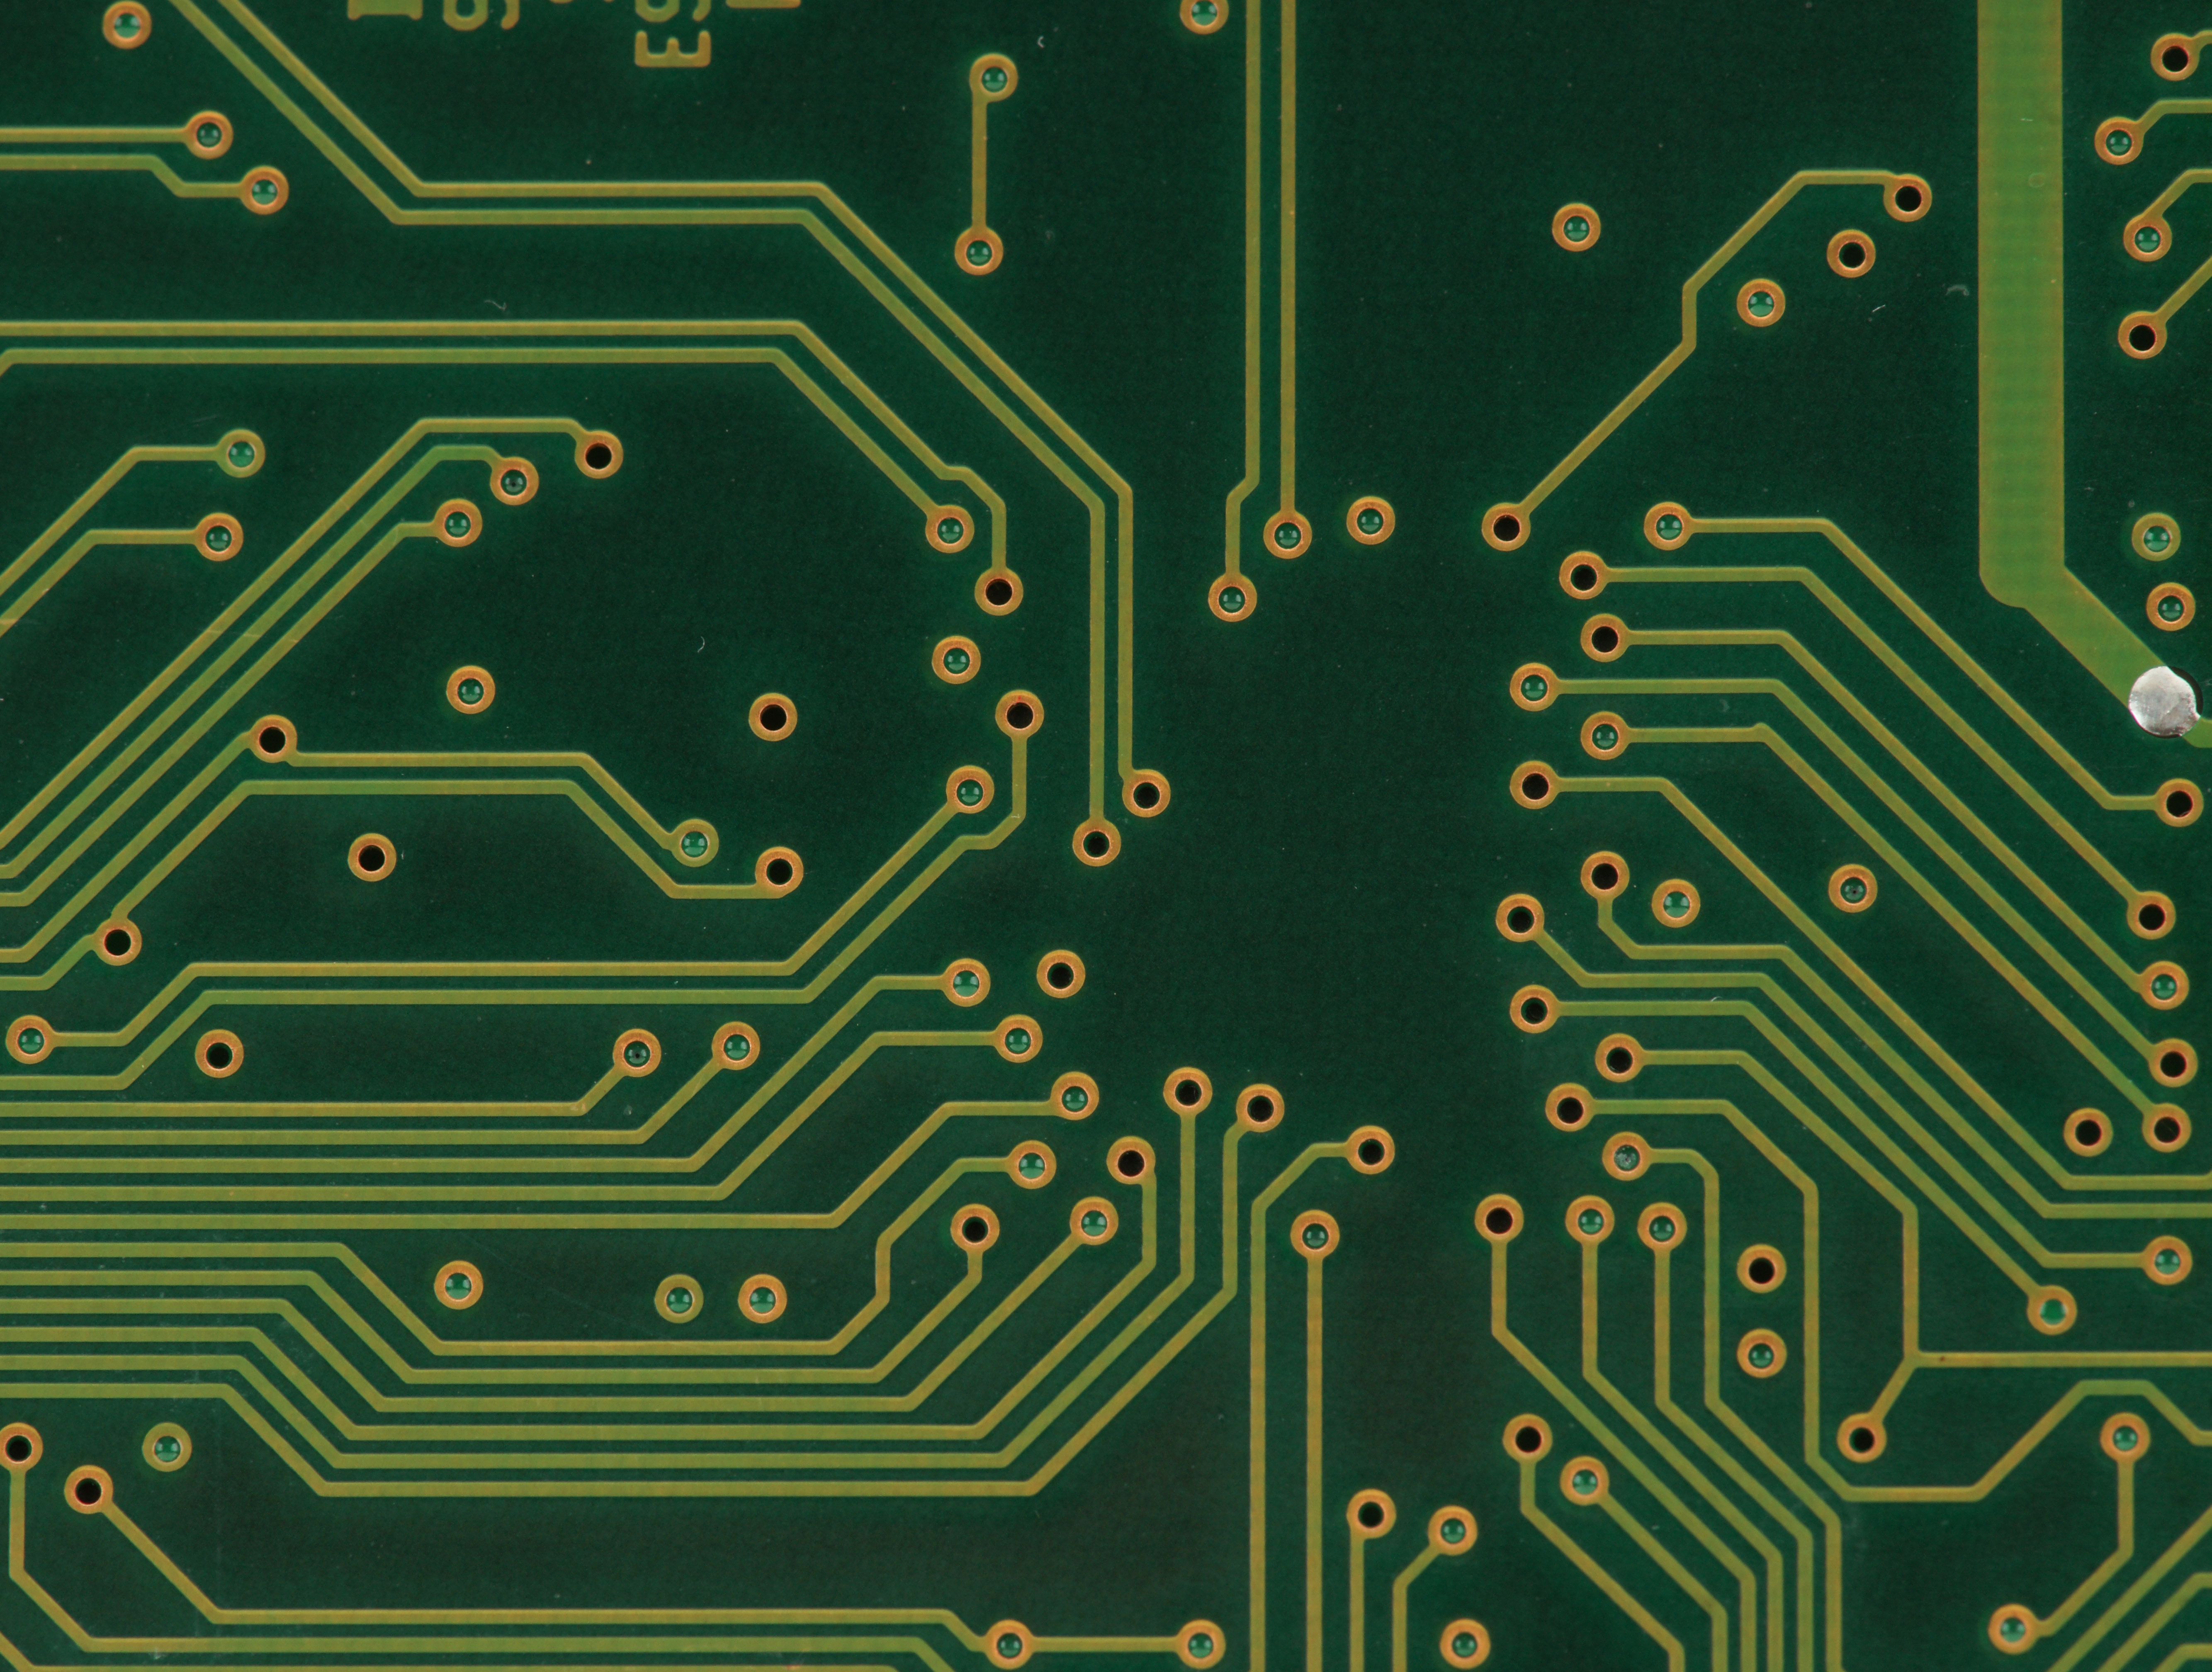 Photo of a Green PCB Printed Circuit Board Texture Background